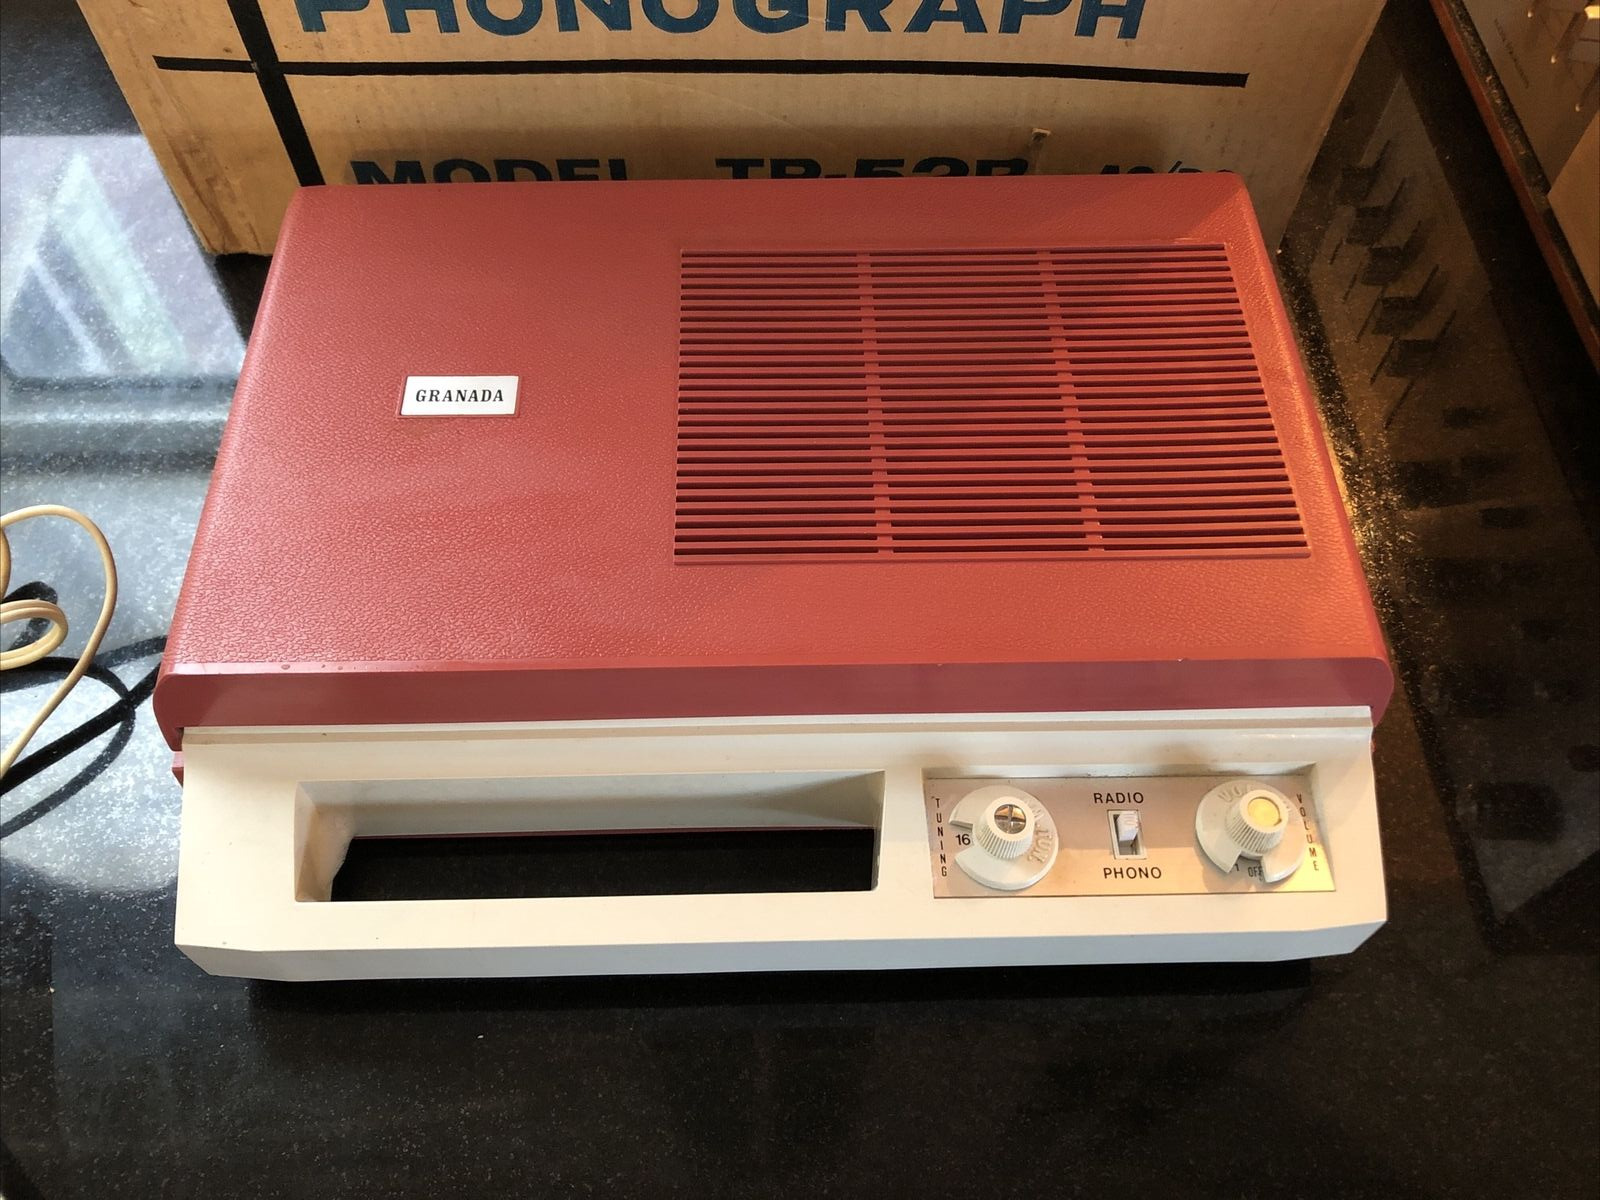 NOS Boxed Granada Radio Phonograph TP-52R Perfect Working Condition